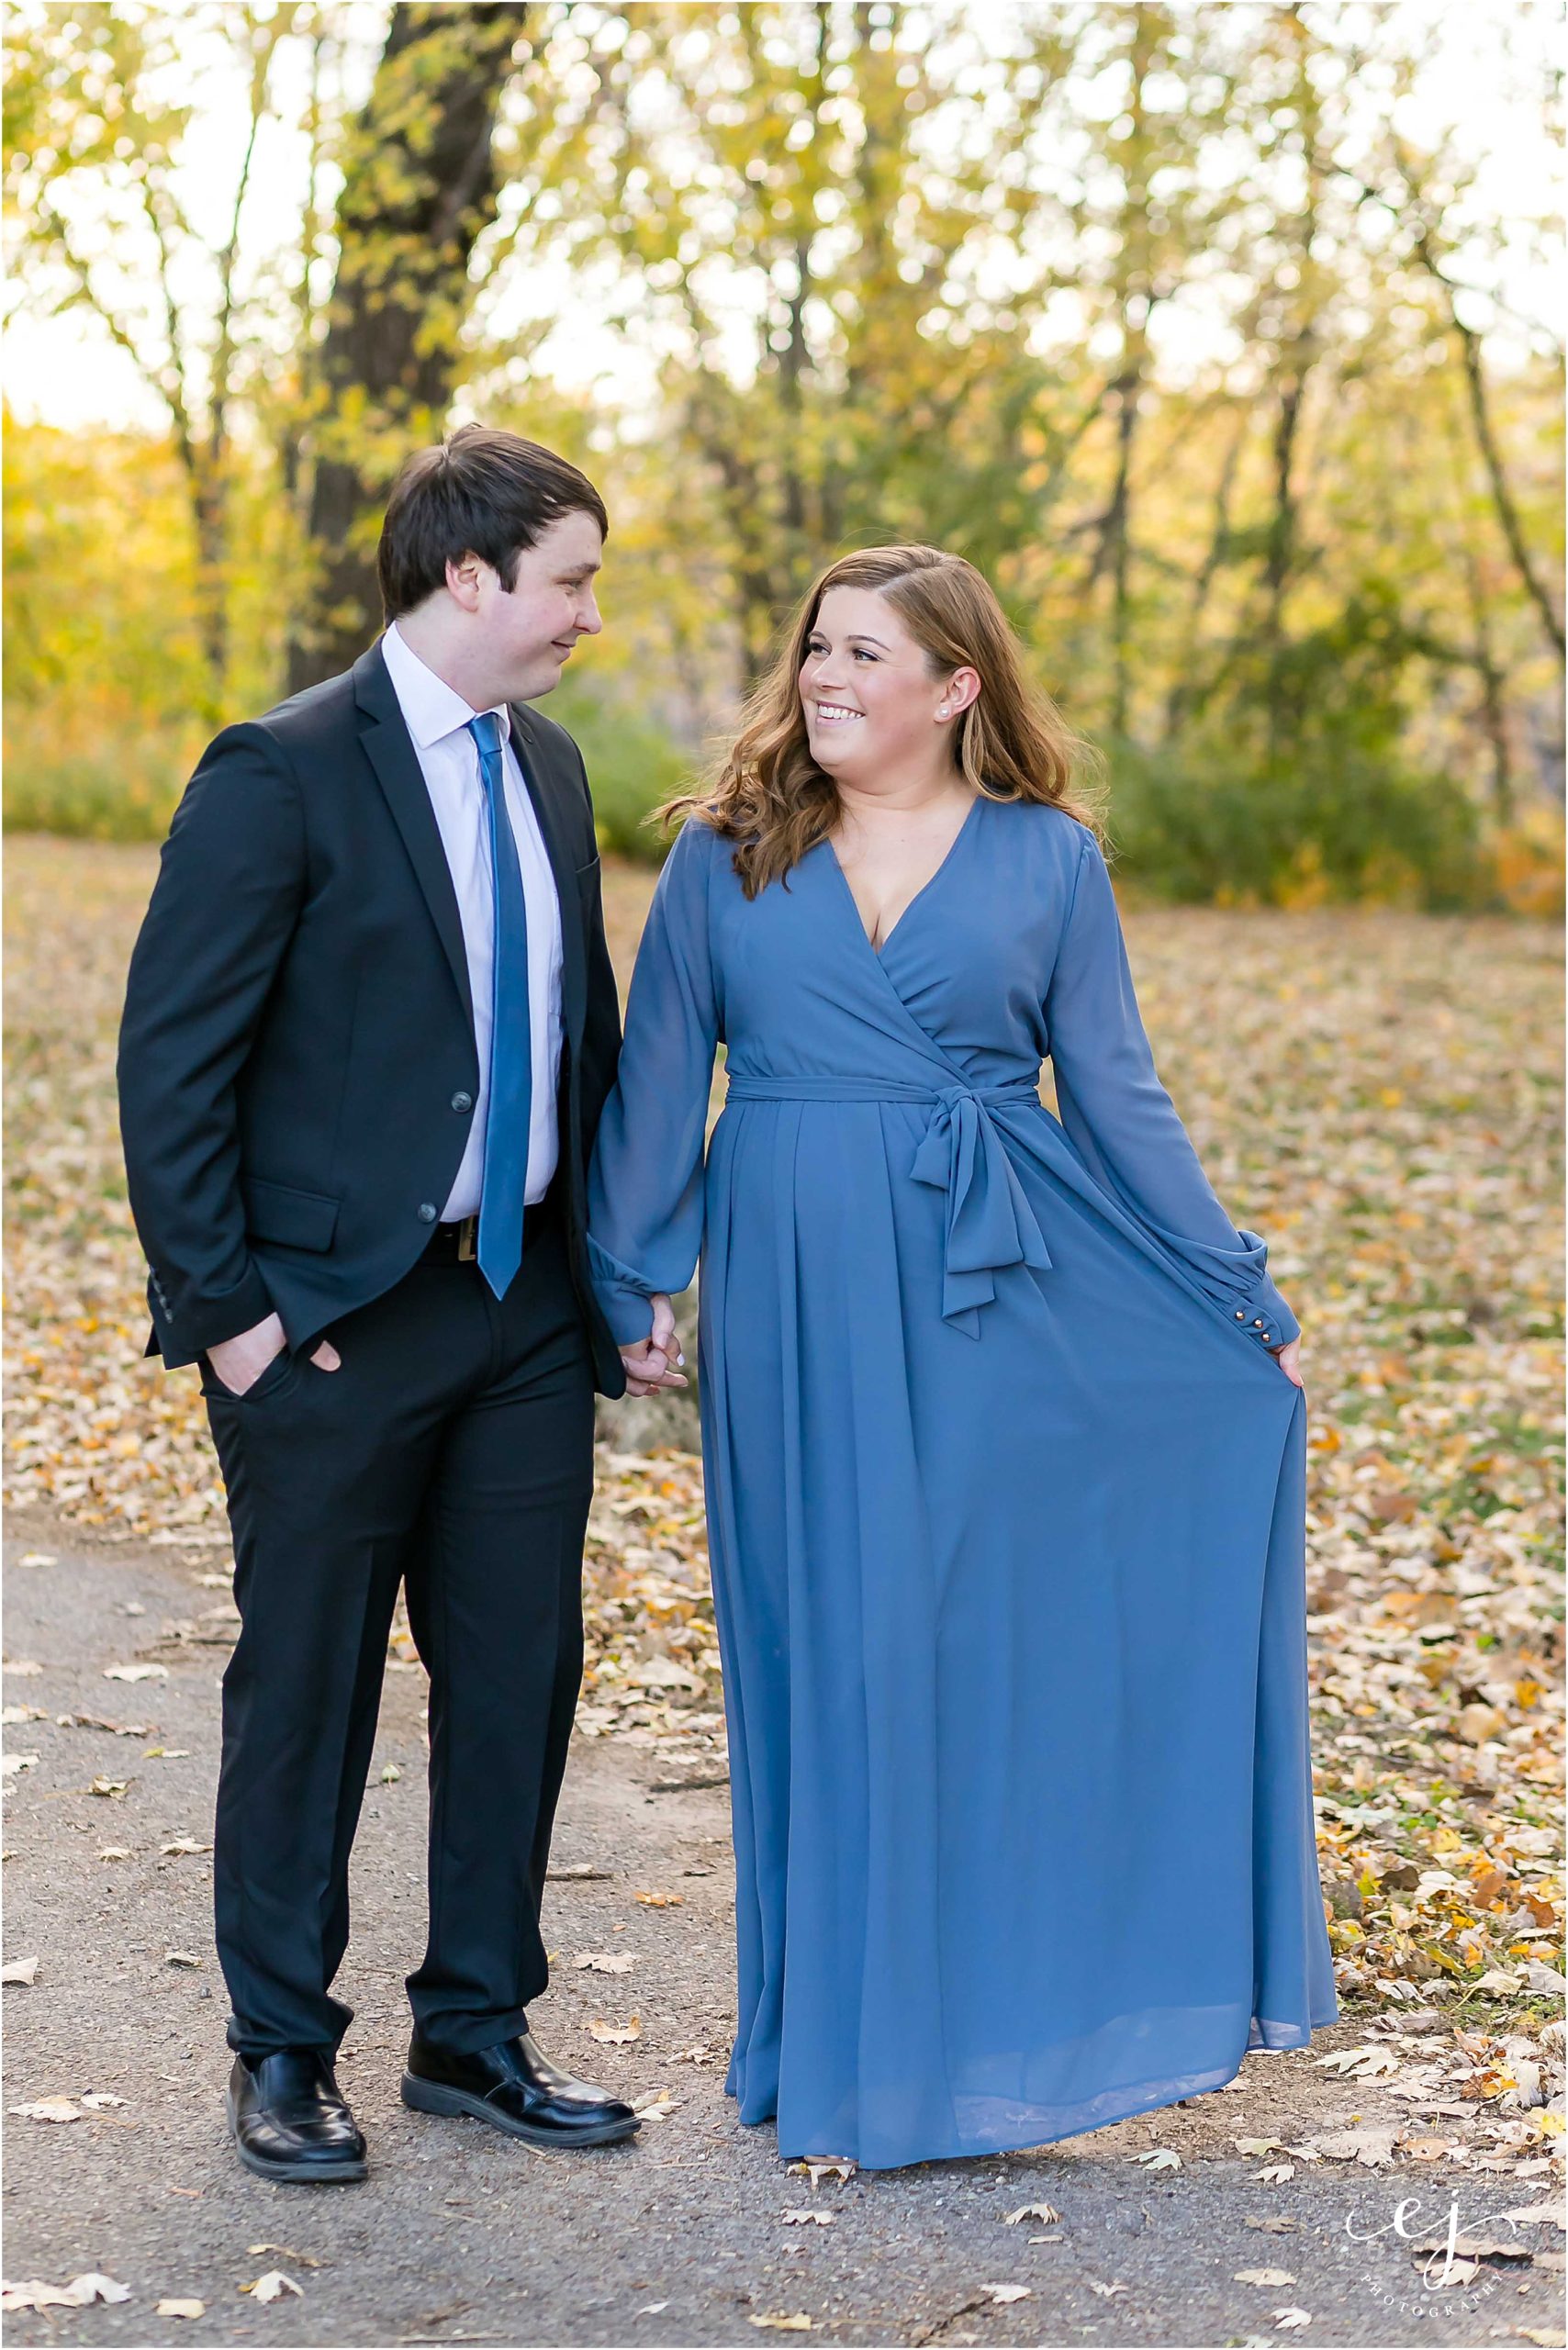 engagement session suit and tie long blue dress walking in park